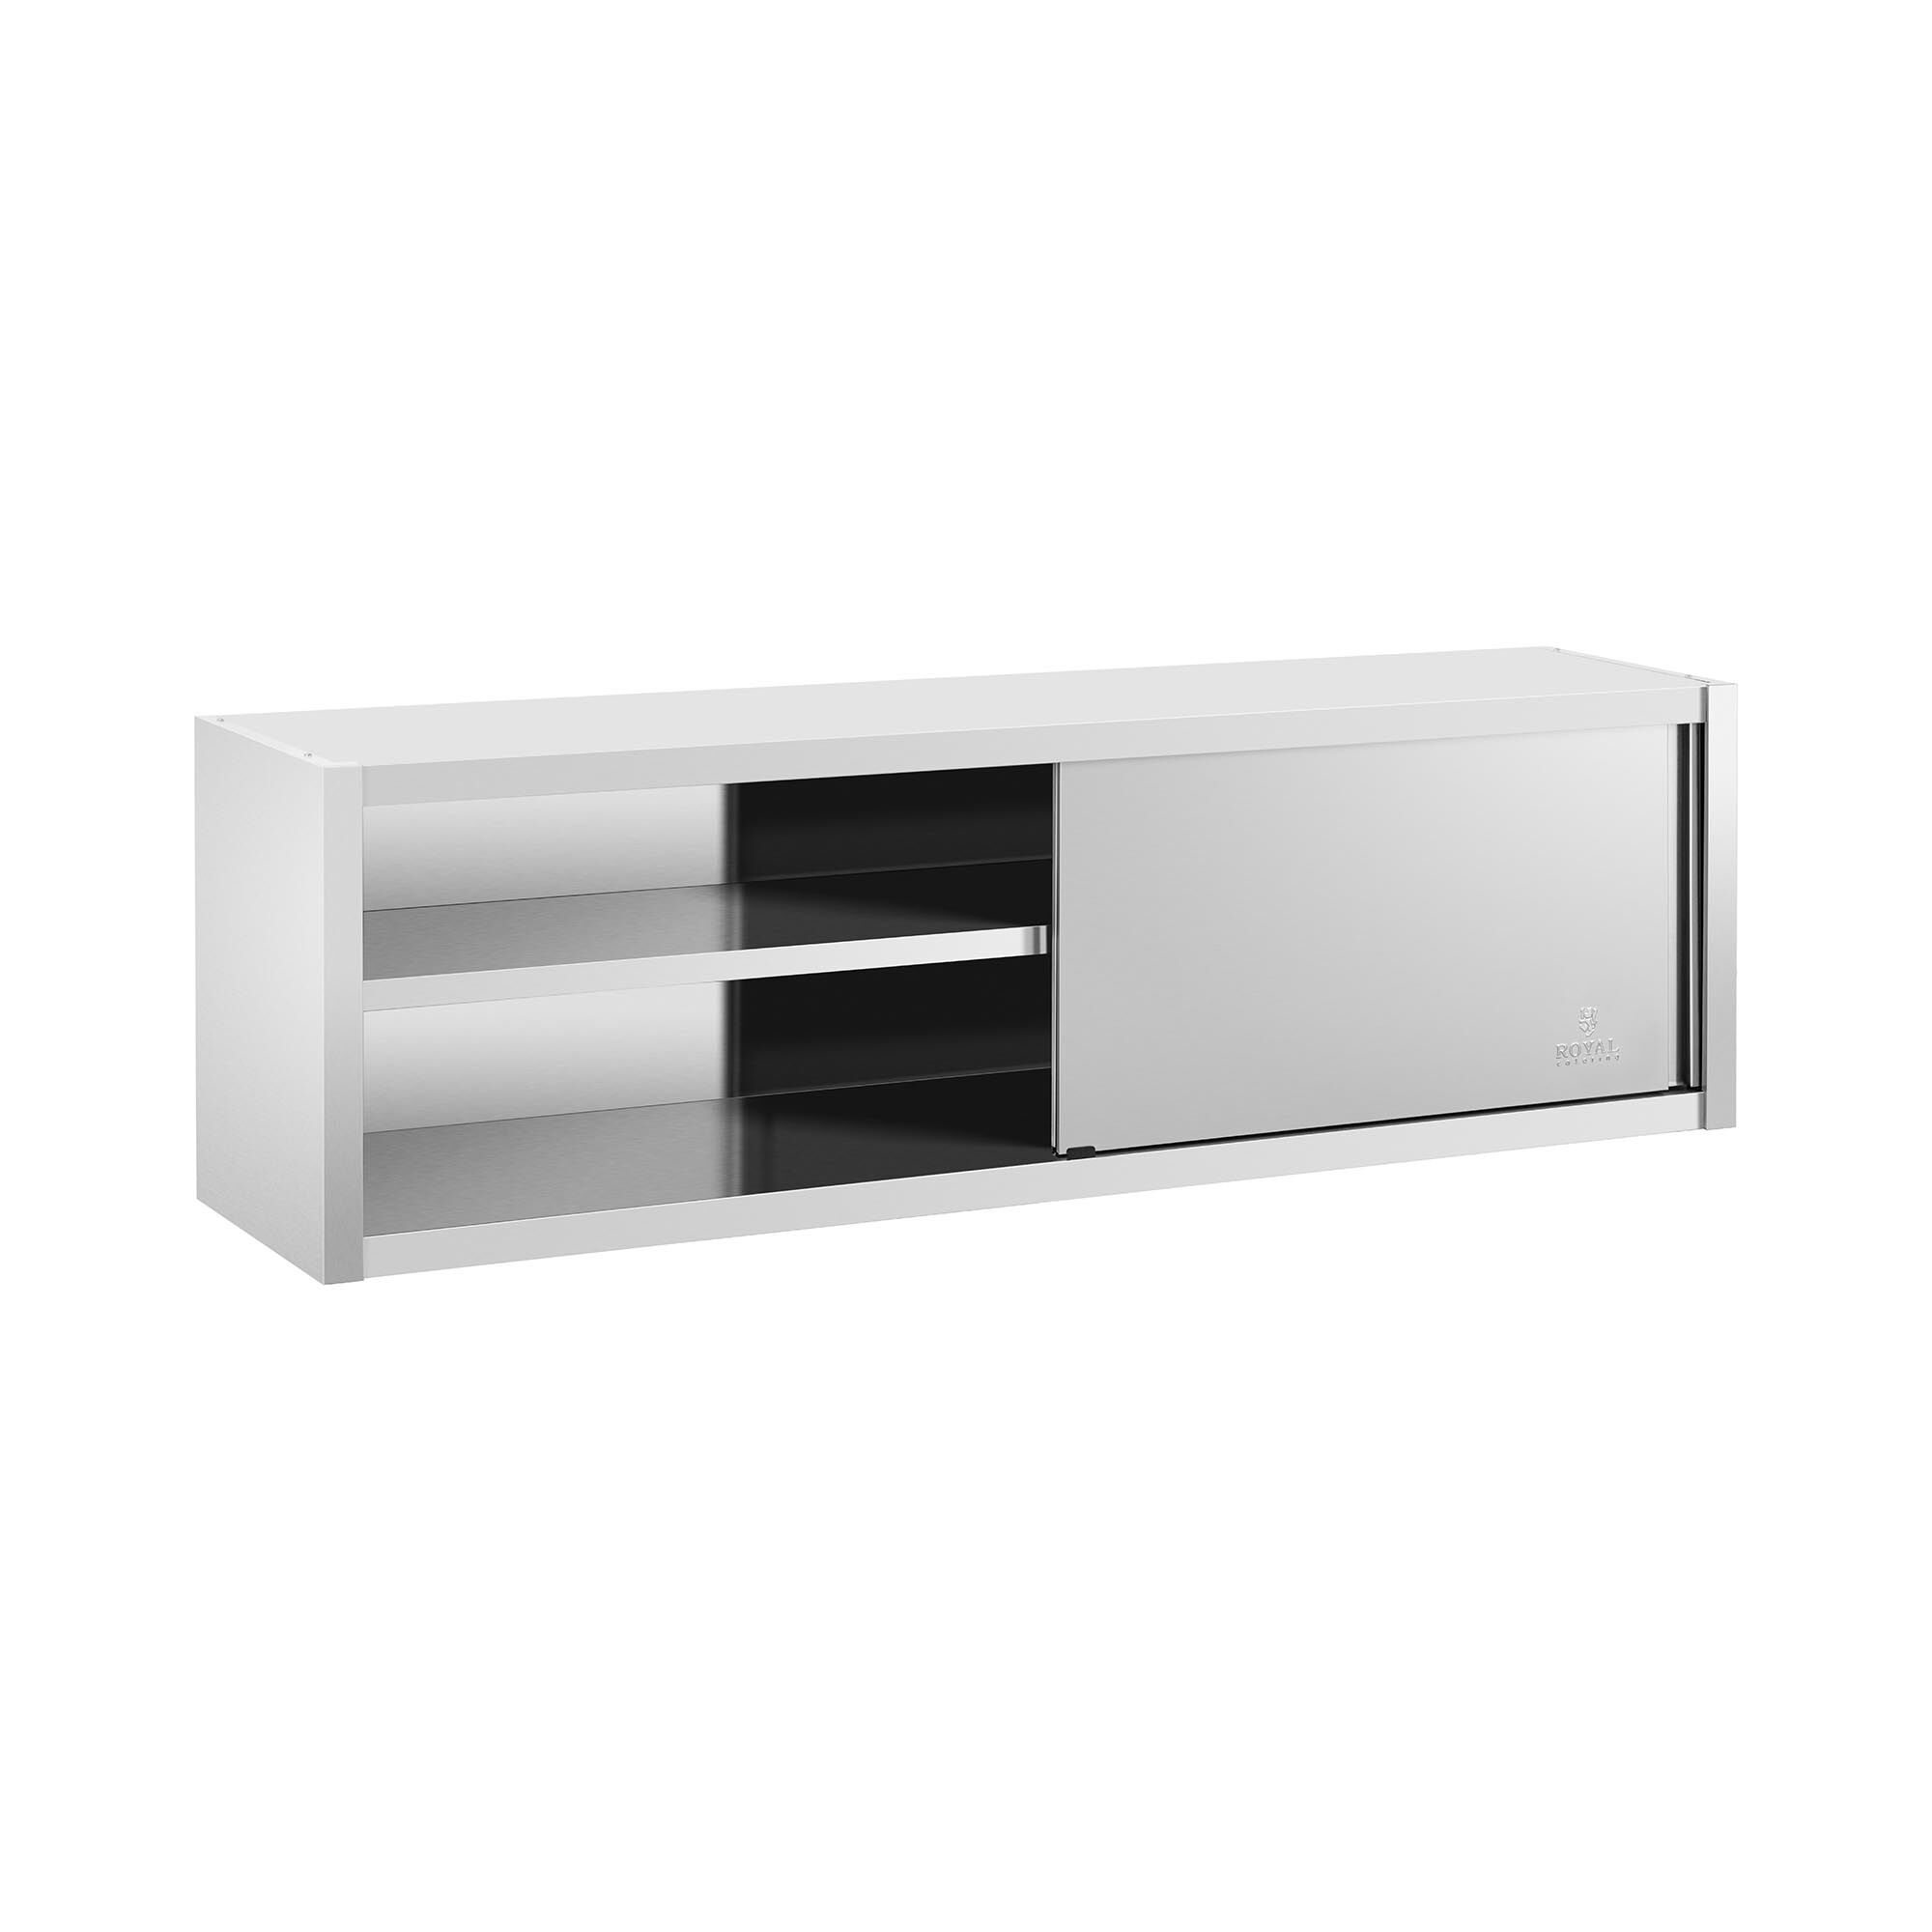 Royal Catering Stainless Steel Hanging Cabinet - 200 x 45 cm - Royal Catering - 300 kg